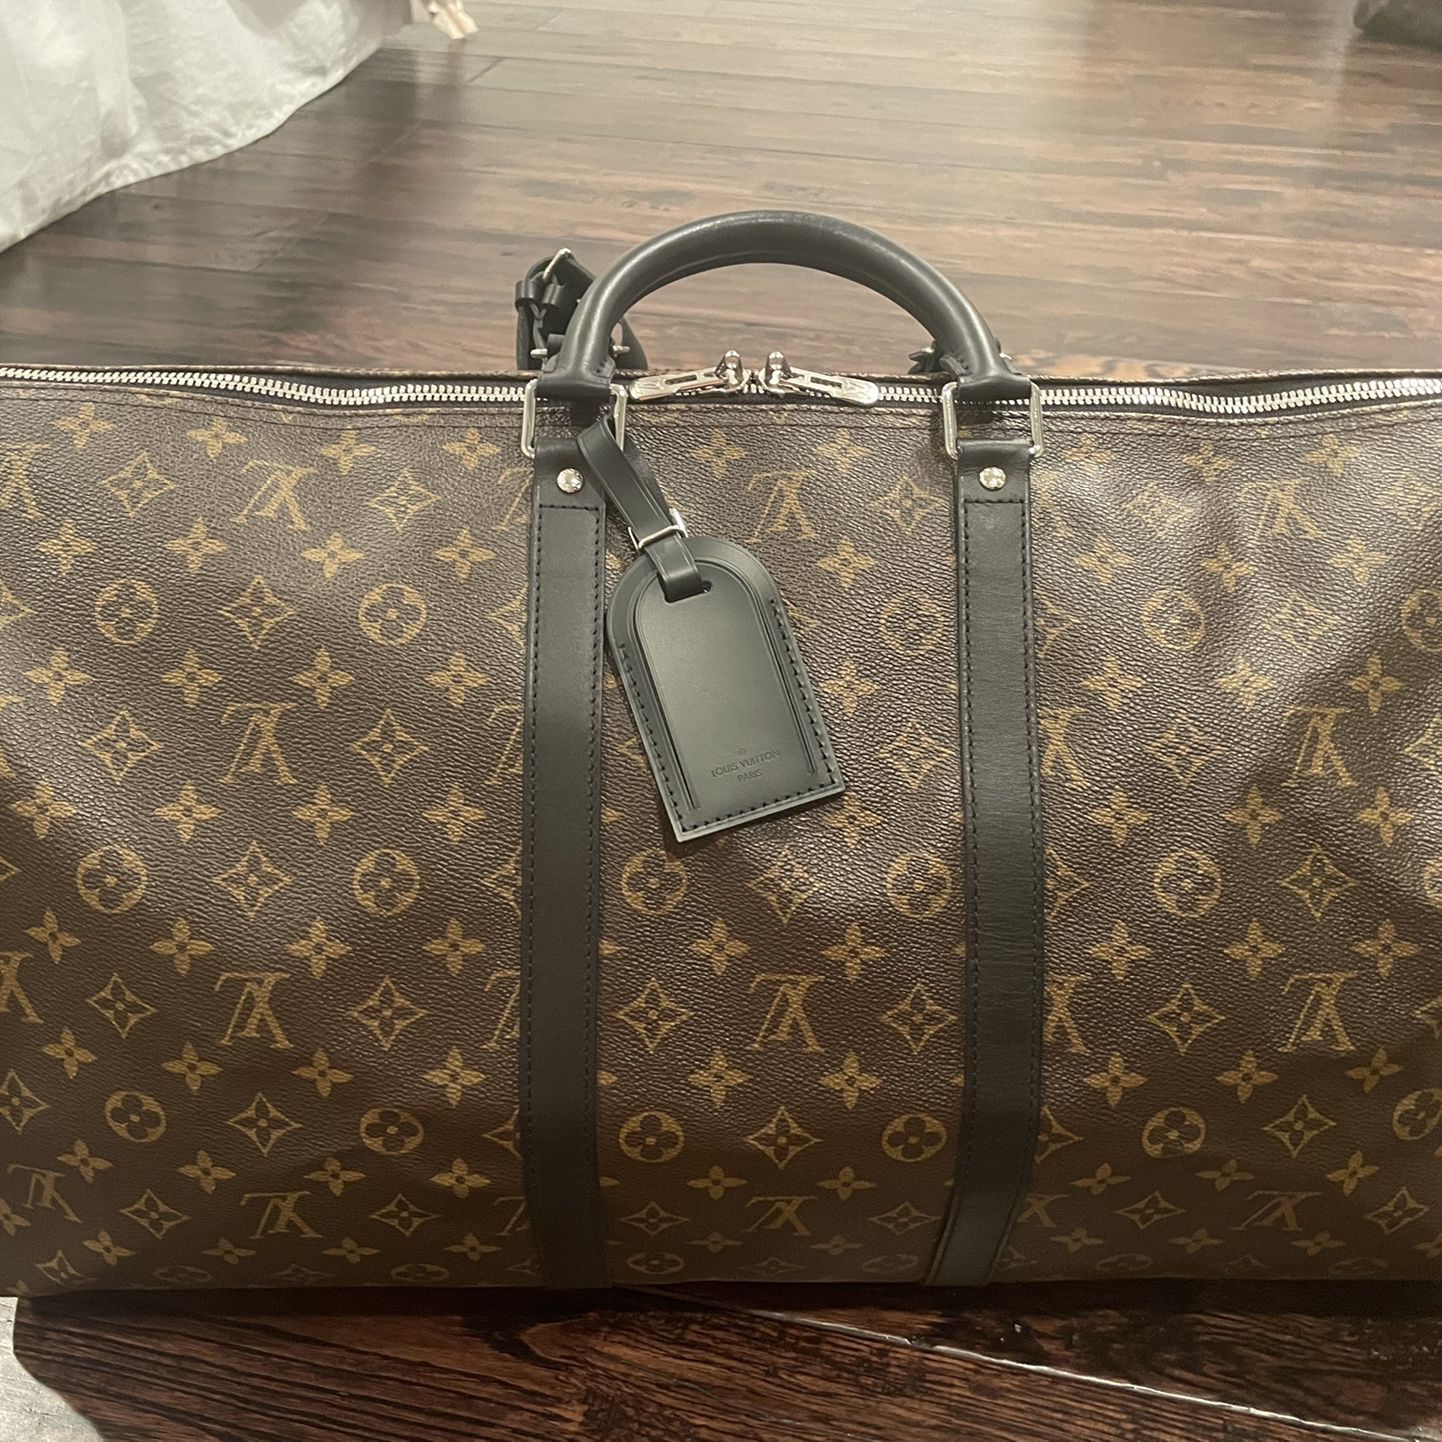 Louis Vuitton NBA Backpack for Sale in Johns Creek, GA - OfferUp